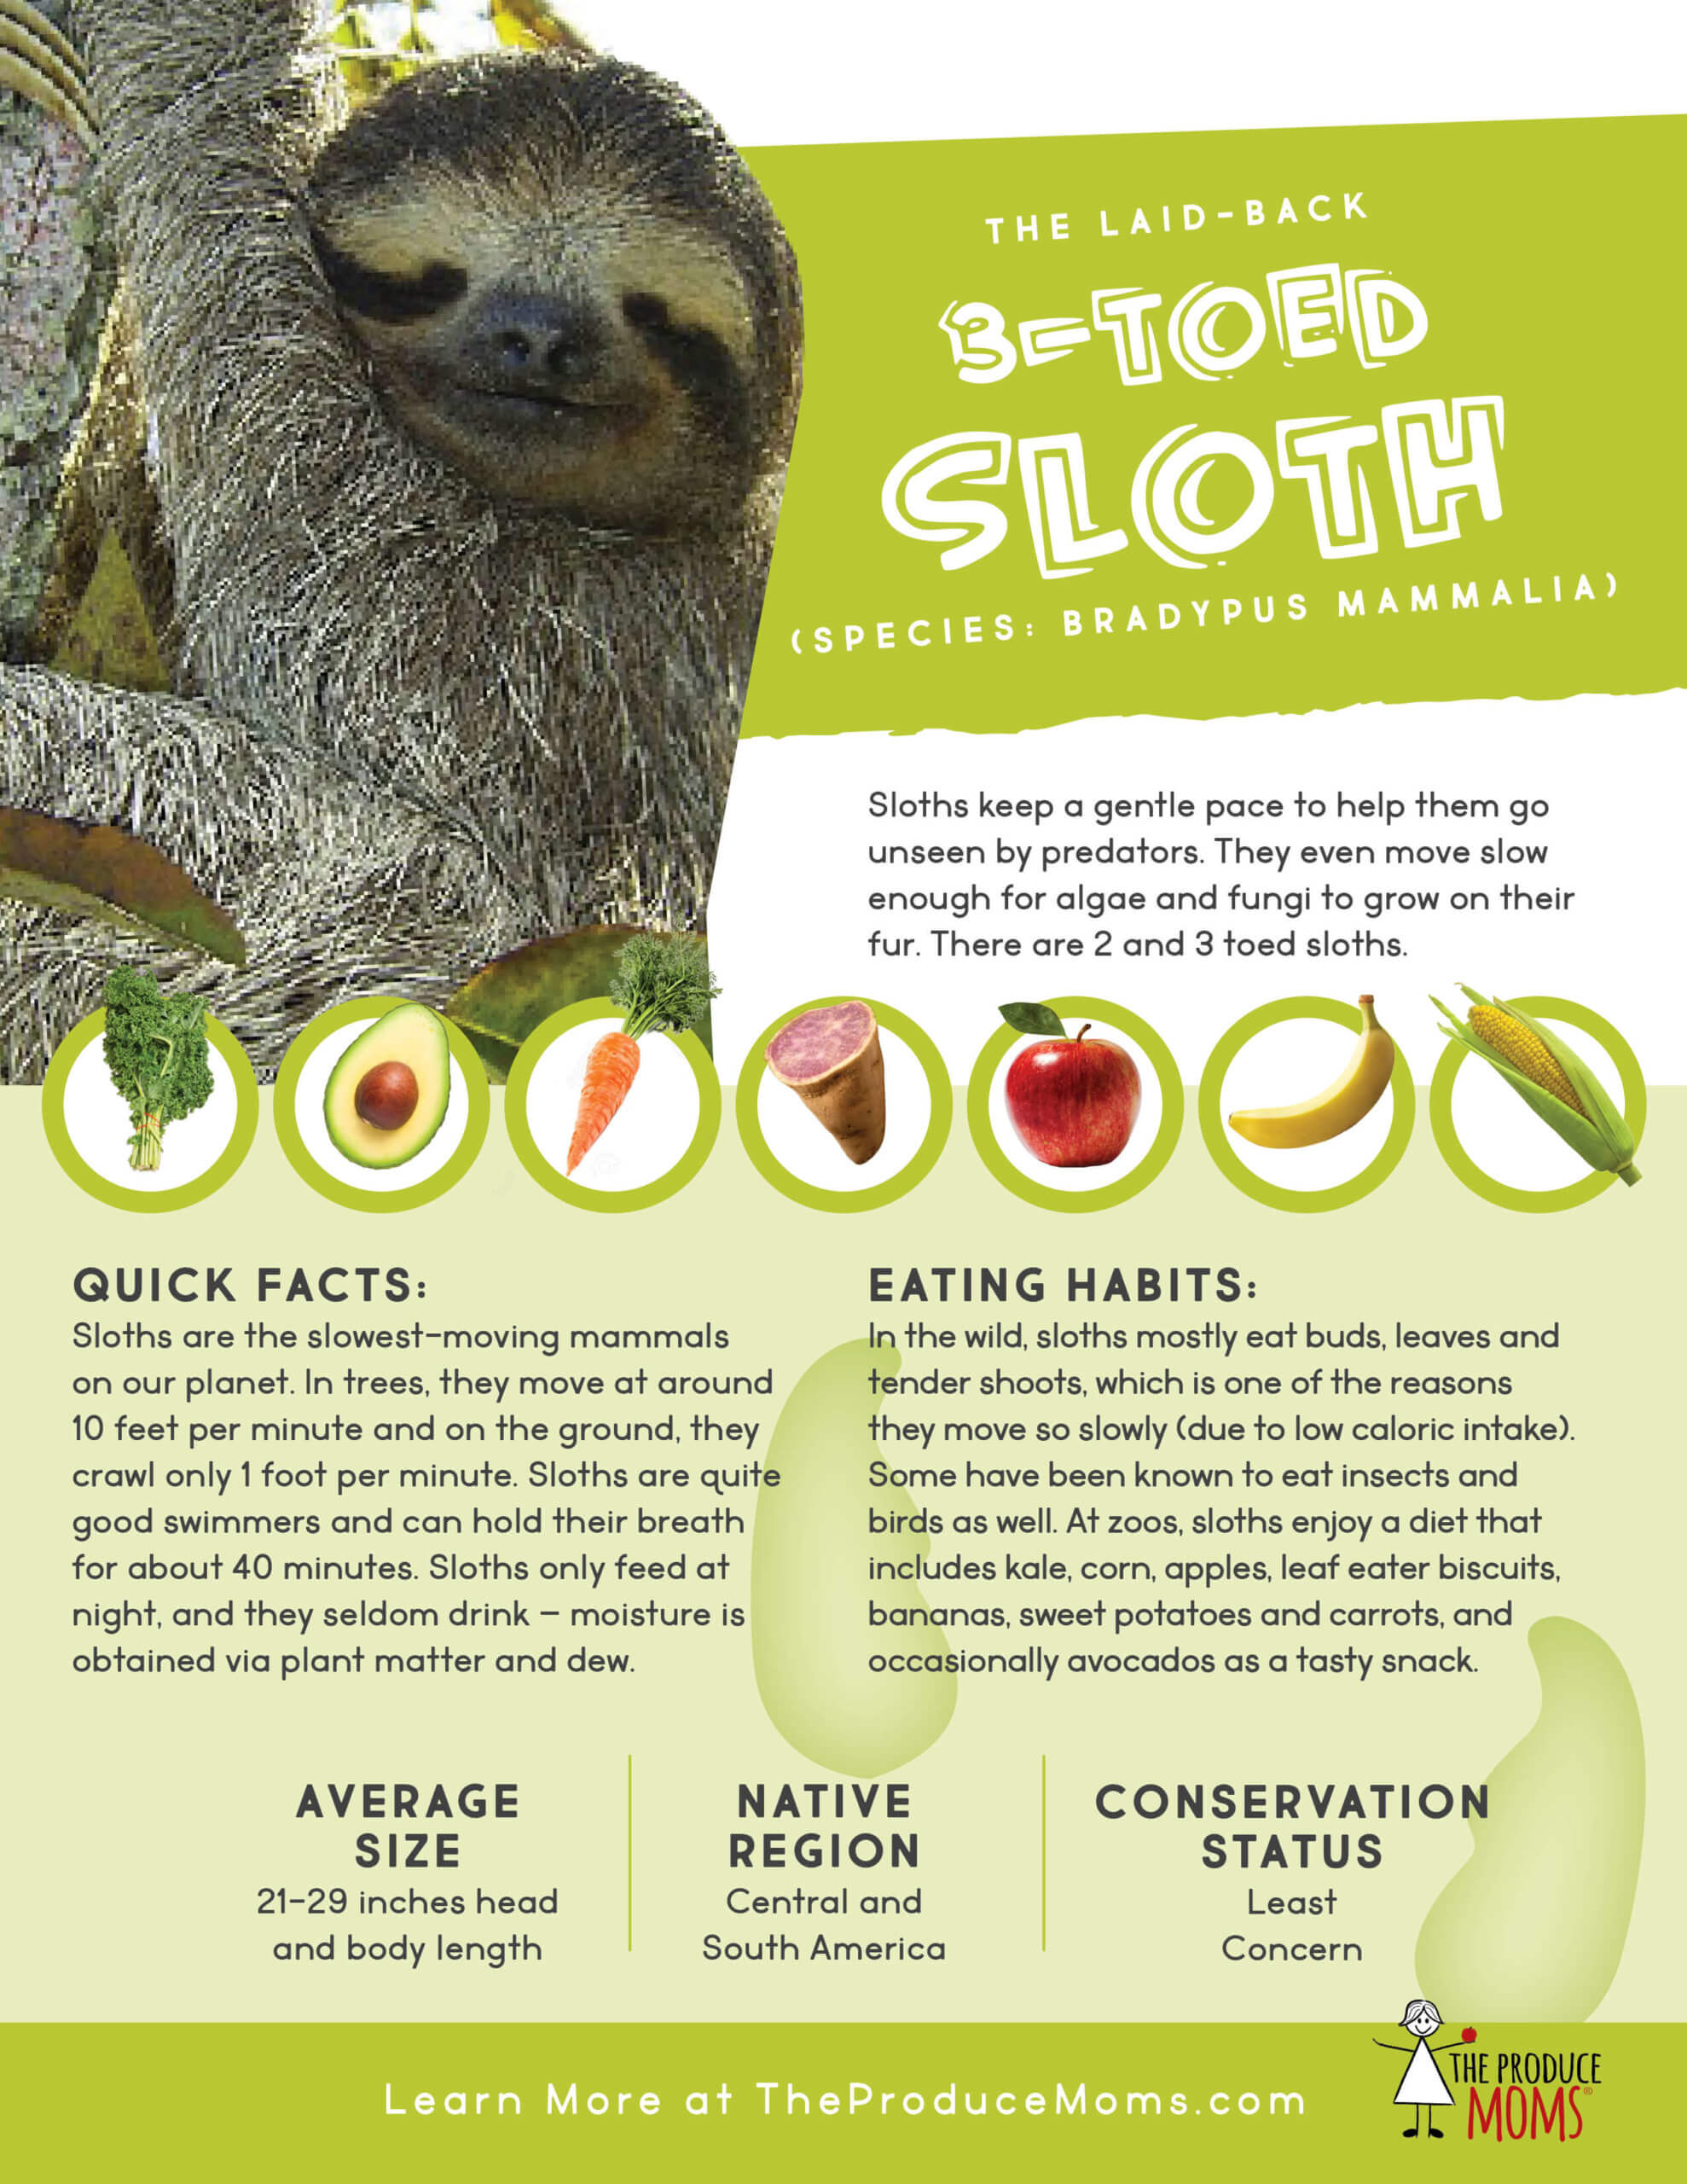 How much food does a sloth eat per day?